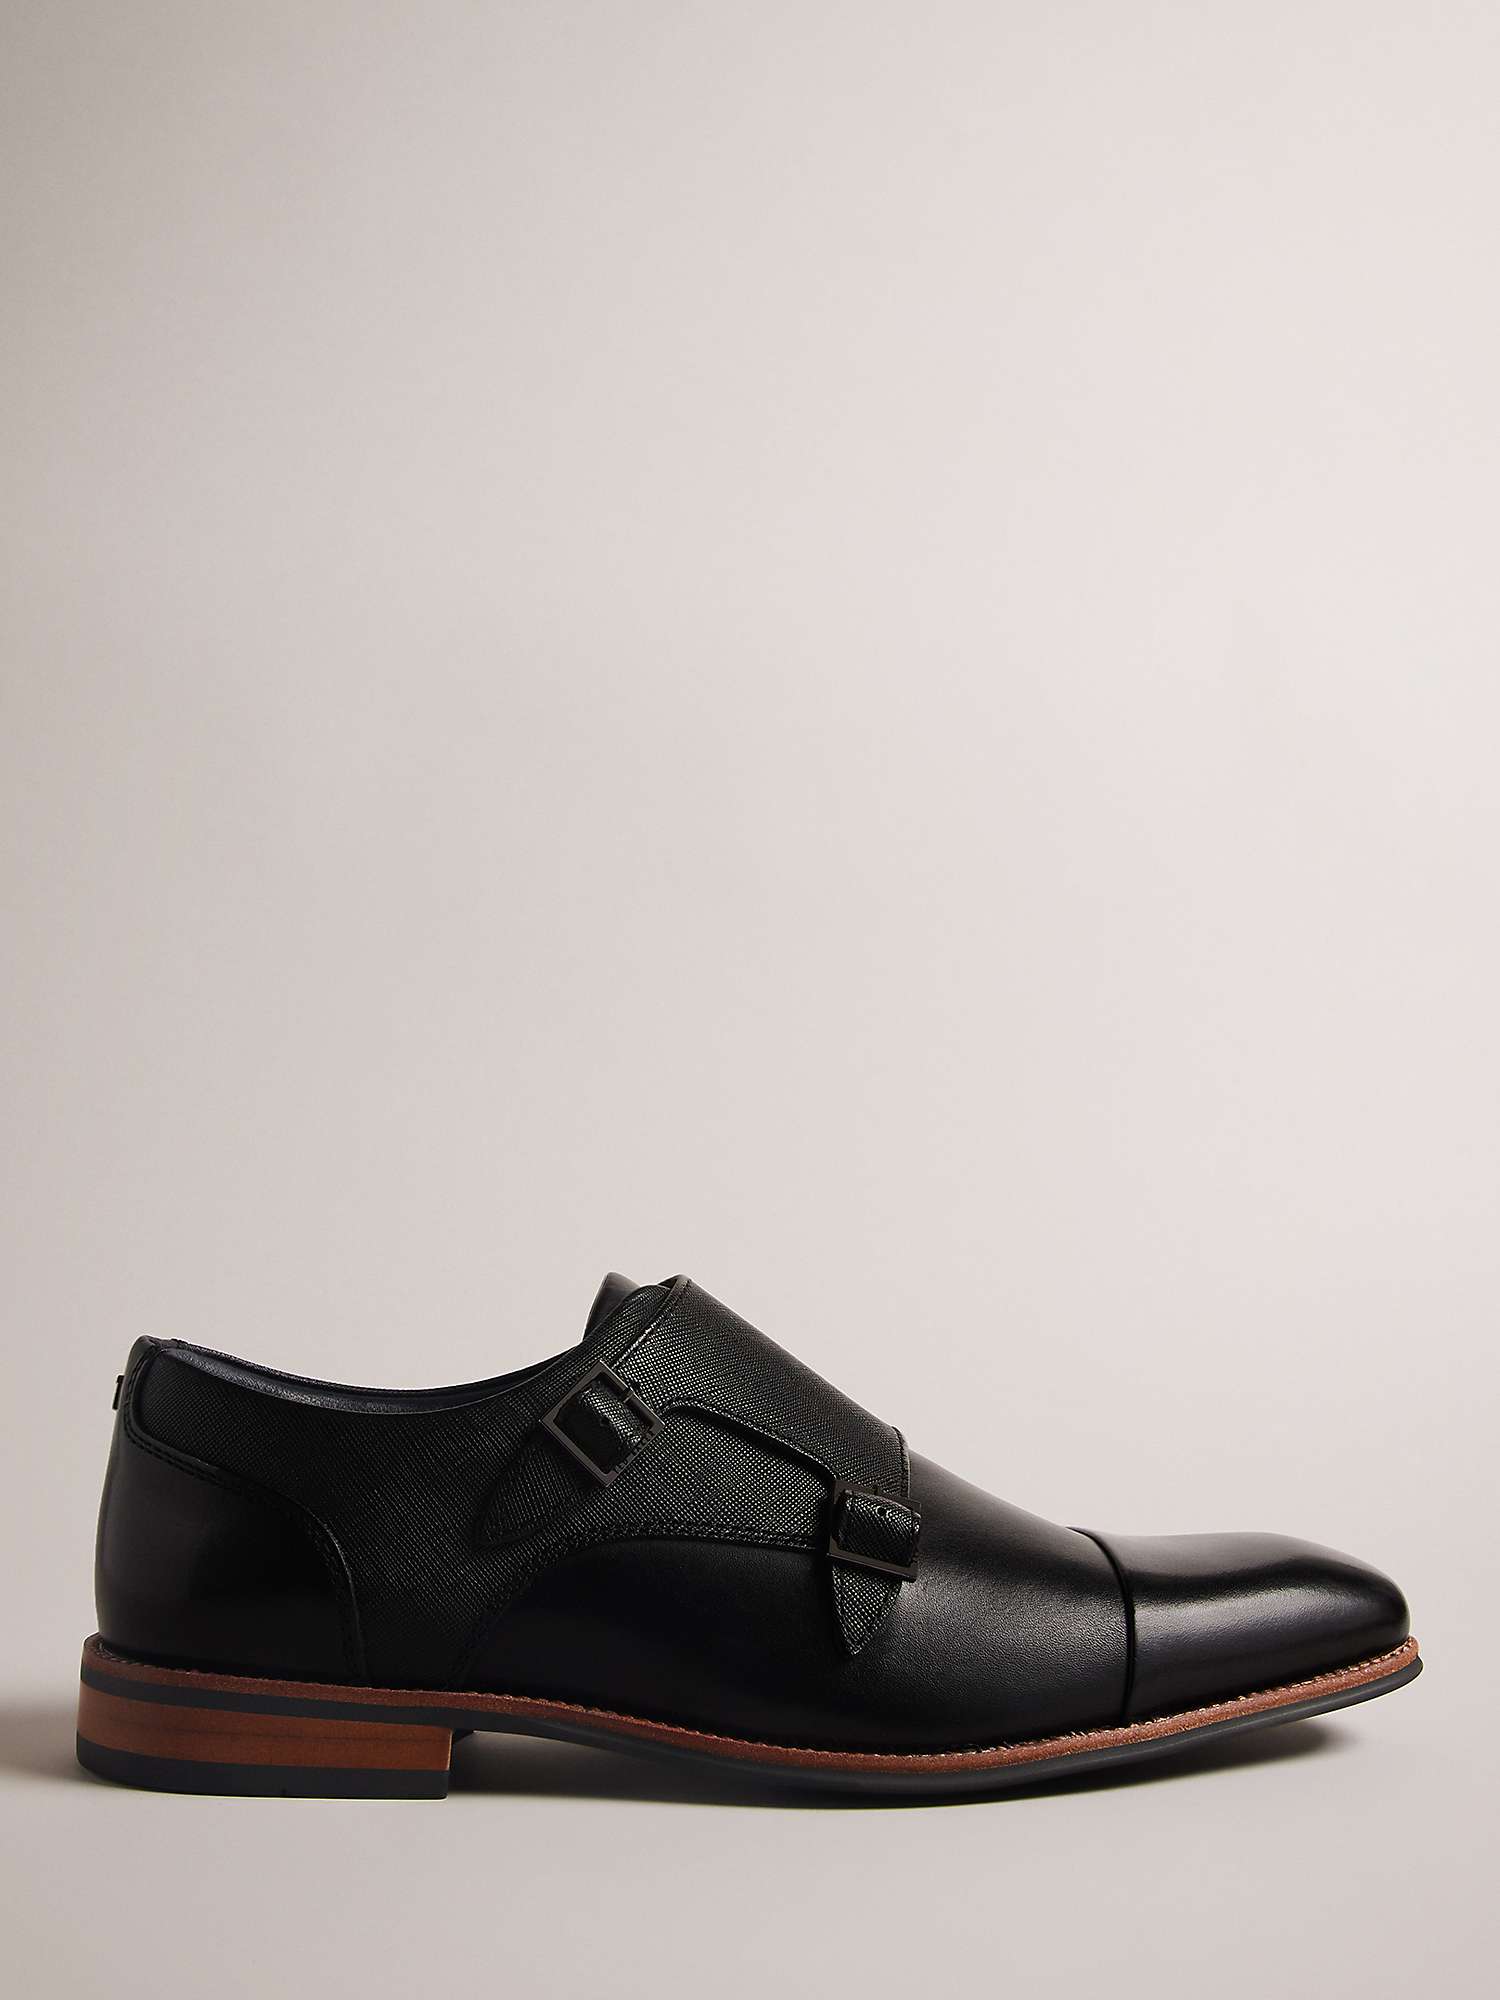 Buy Ted Baker Alicott Double Monk Leather Shoes, Black Online at johnlewis.com